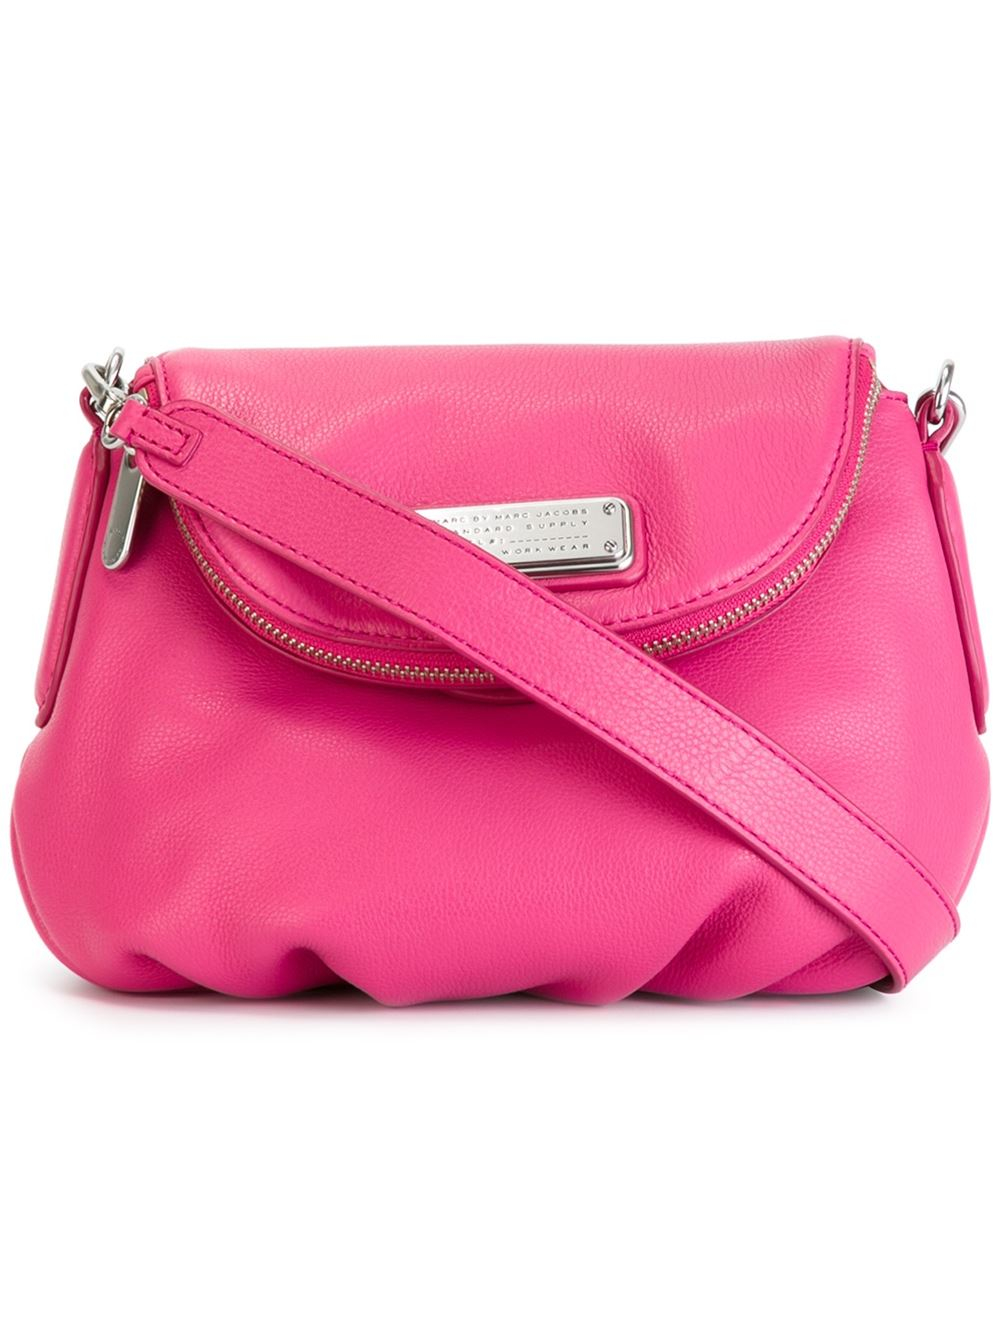 Marc by marc jacobs &#39;new Q Mini Natasha&#39; Crossbody Bag in Multicolor (PINK/PURPLE) - Save 41% | Lyst